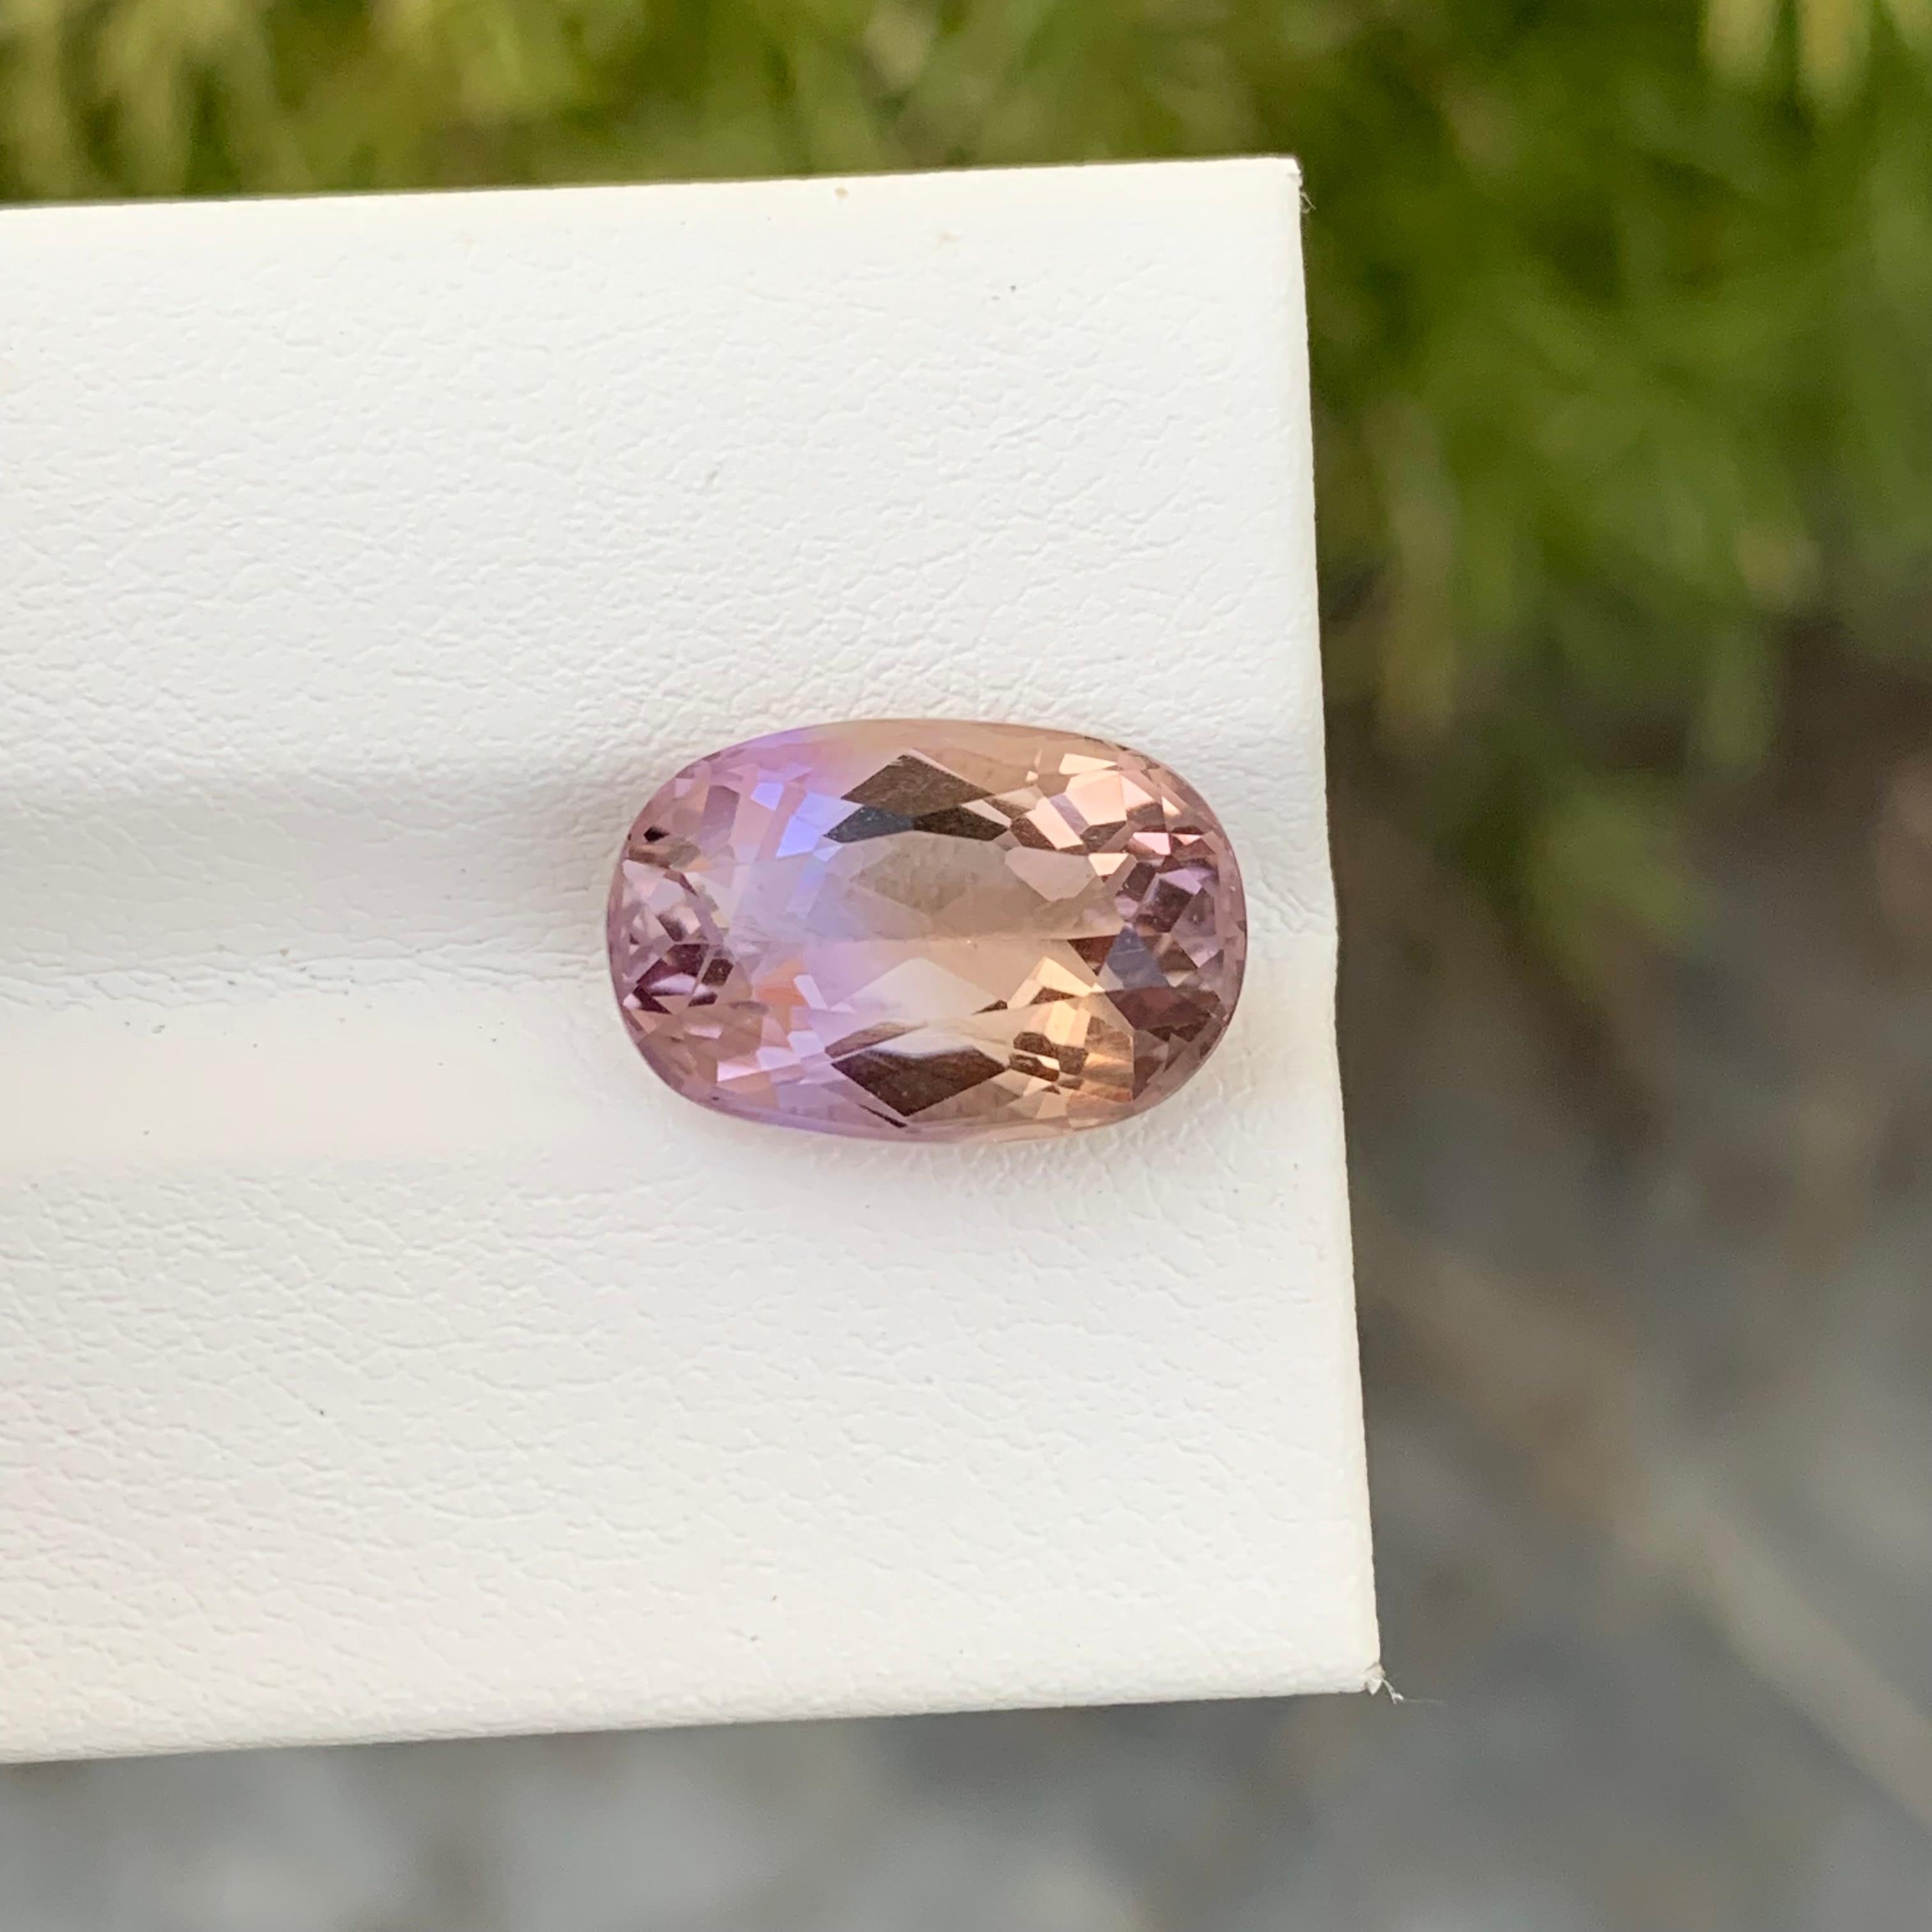 Faceted Ametrine
Weight: 5.85 Carats
Dimension; 13.9 x 9.2 x 7.2 Mm
Origin: Brazil
Color: Purple & Yellow
Shape: Oval 
Treatment: Non
Certficate: On Demand
.
Ametrine is a unique and captivating gemstone that displays a harmonious blend of two